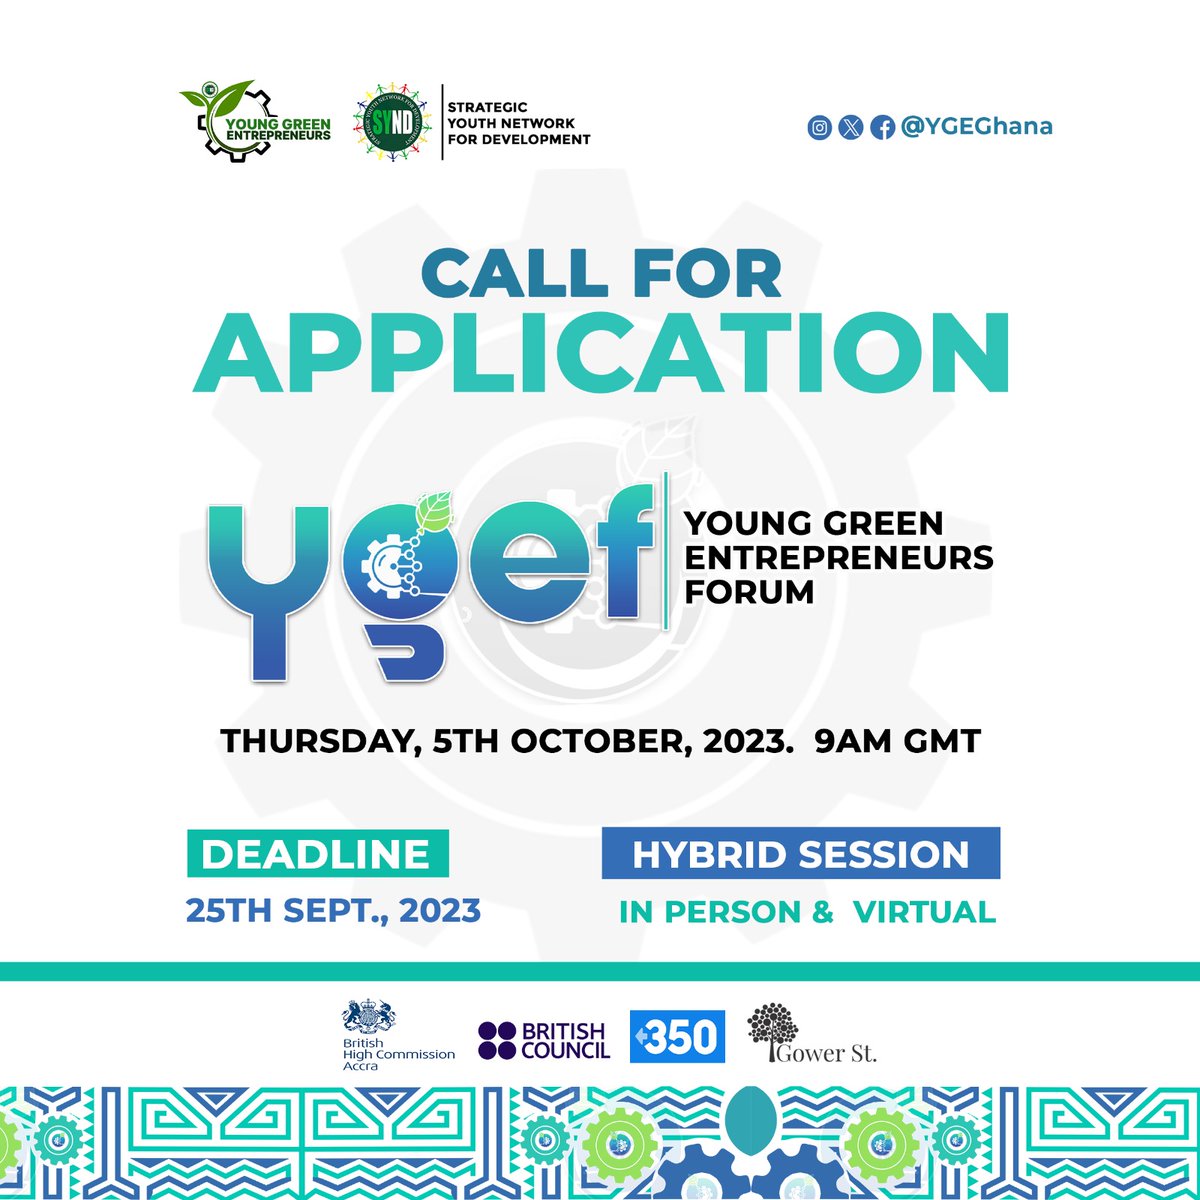 Don't miss out on this exceptional opportunity to contribute to the ongoing dialogue on Green entrepreneurship. Apply now to secure your spot at the Young Green Entrepreneurs Forum.

Click to register now: shorturl.at/rS478

#YouthForChange #GreenInnovations #YGEF2023